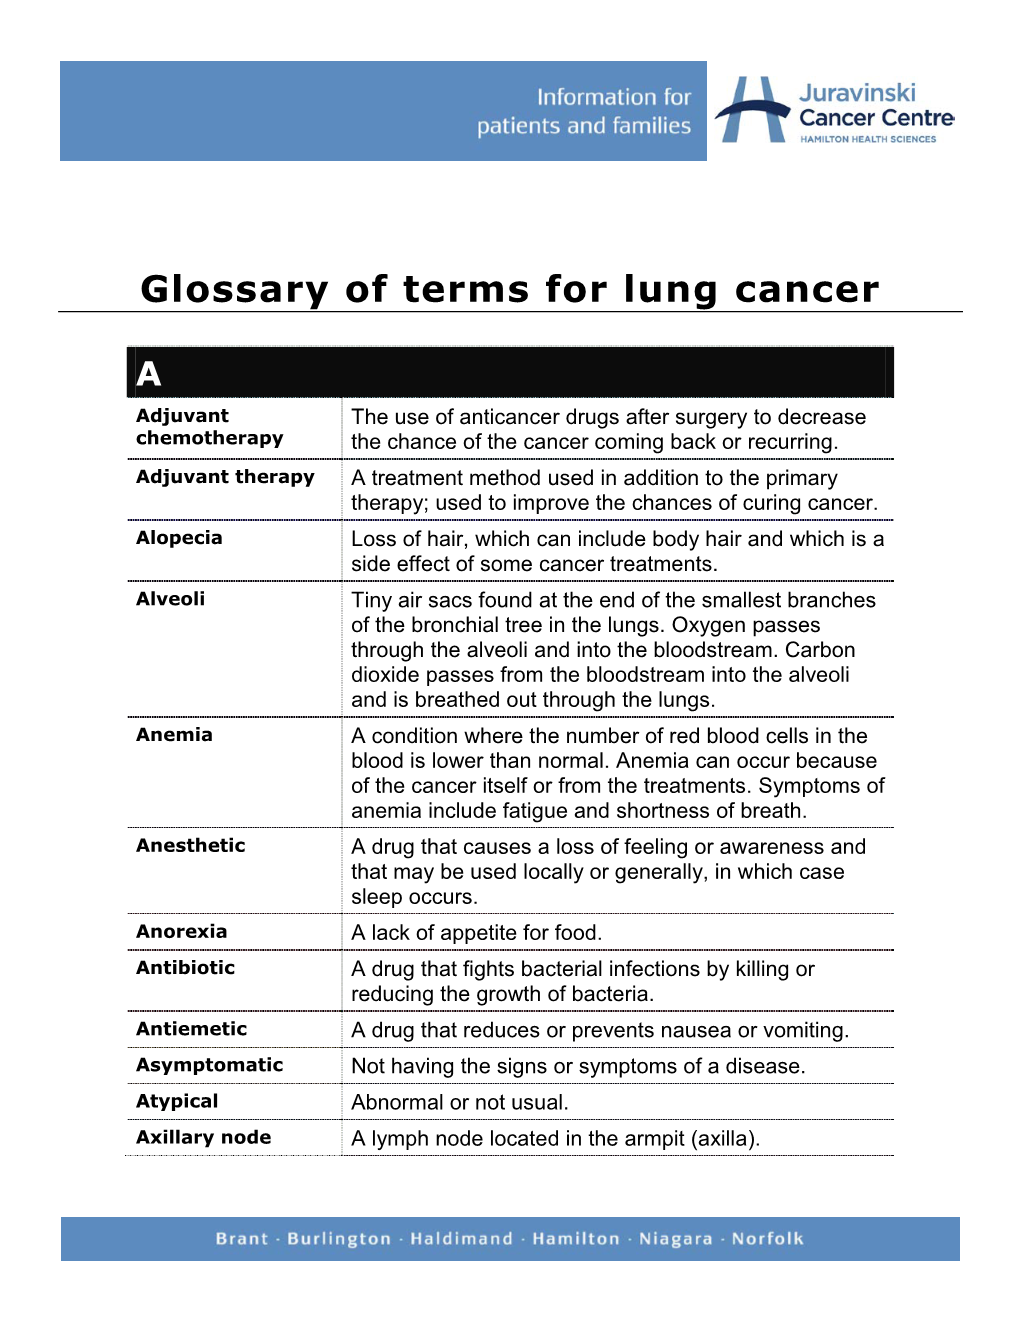 Glossary of Terms for Lung Cancer